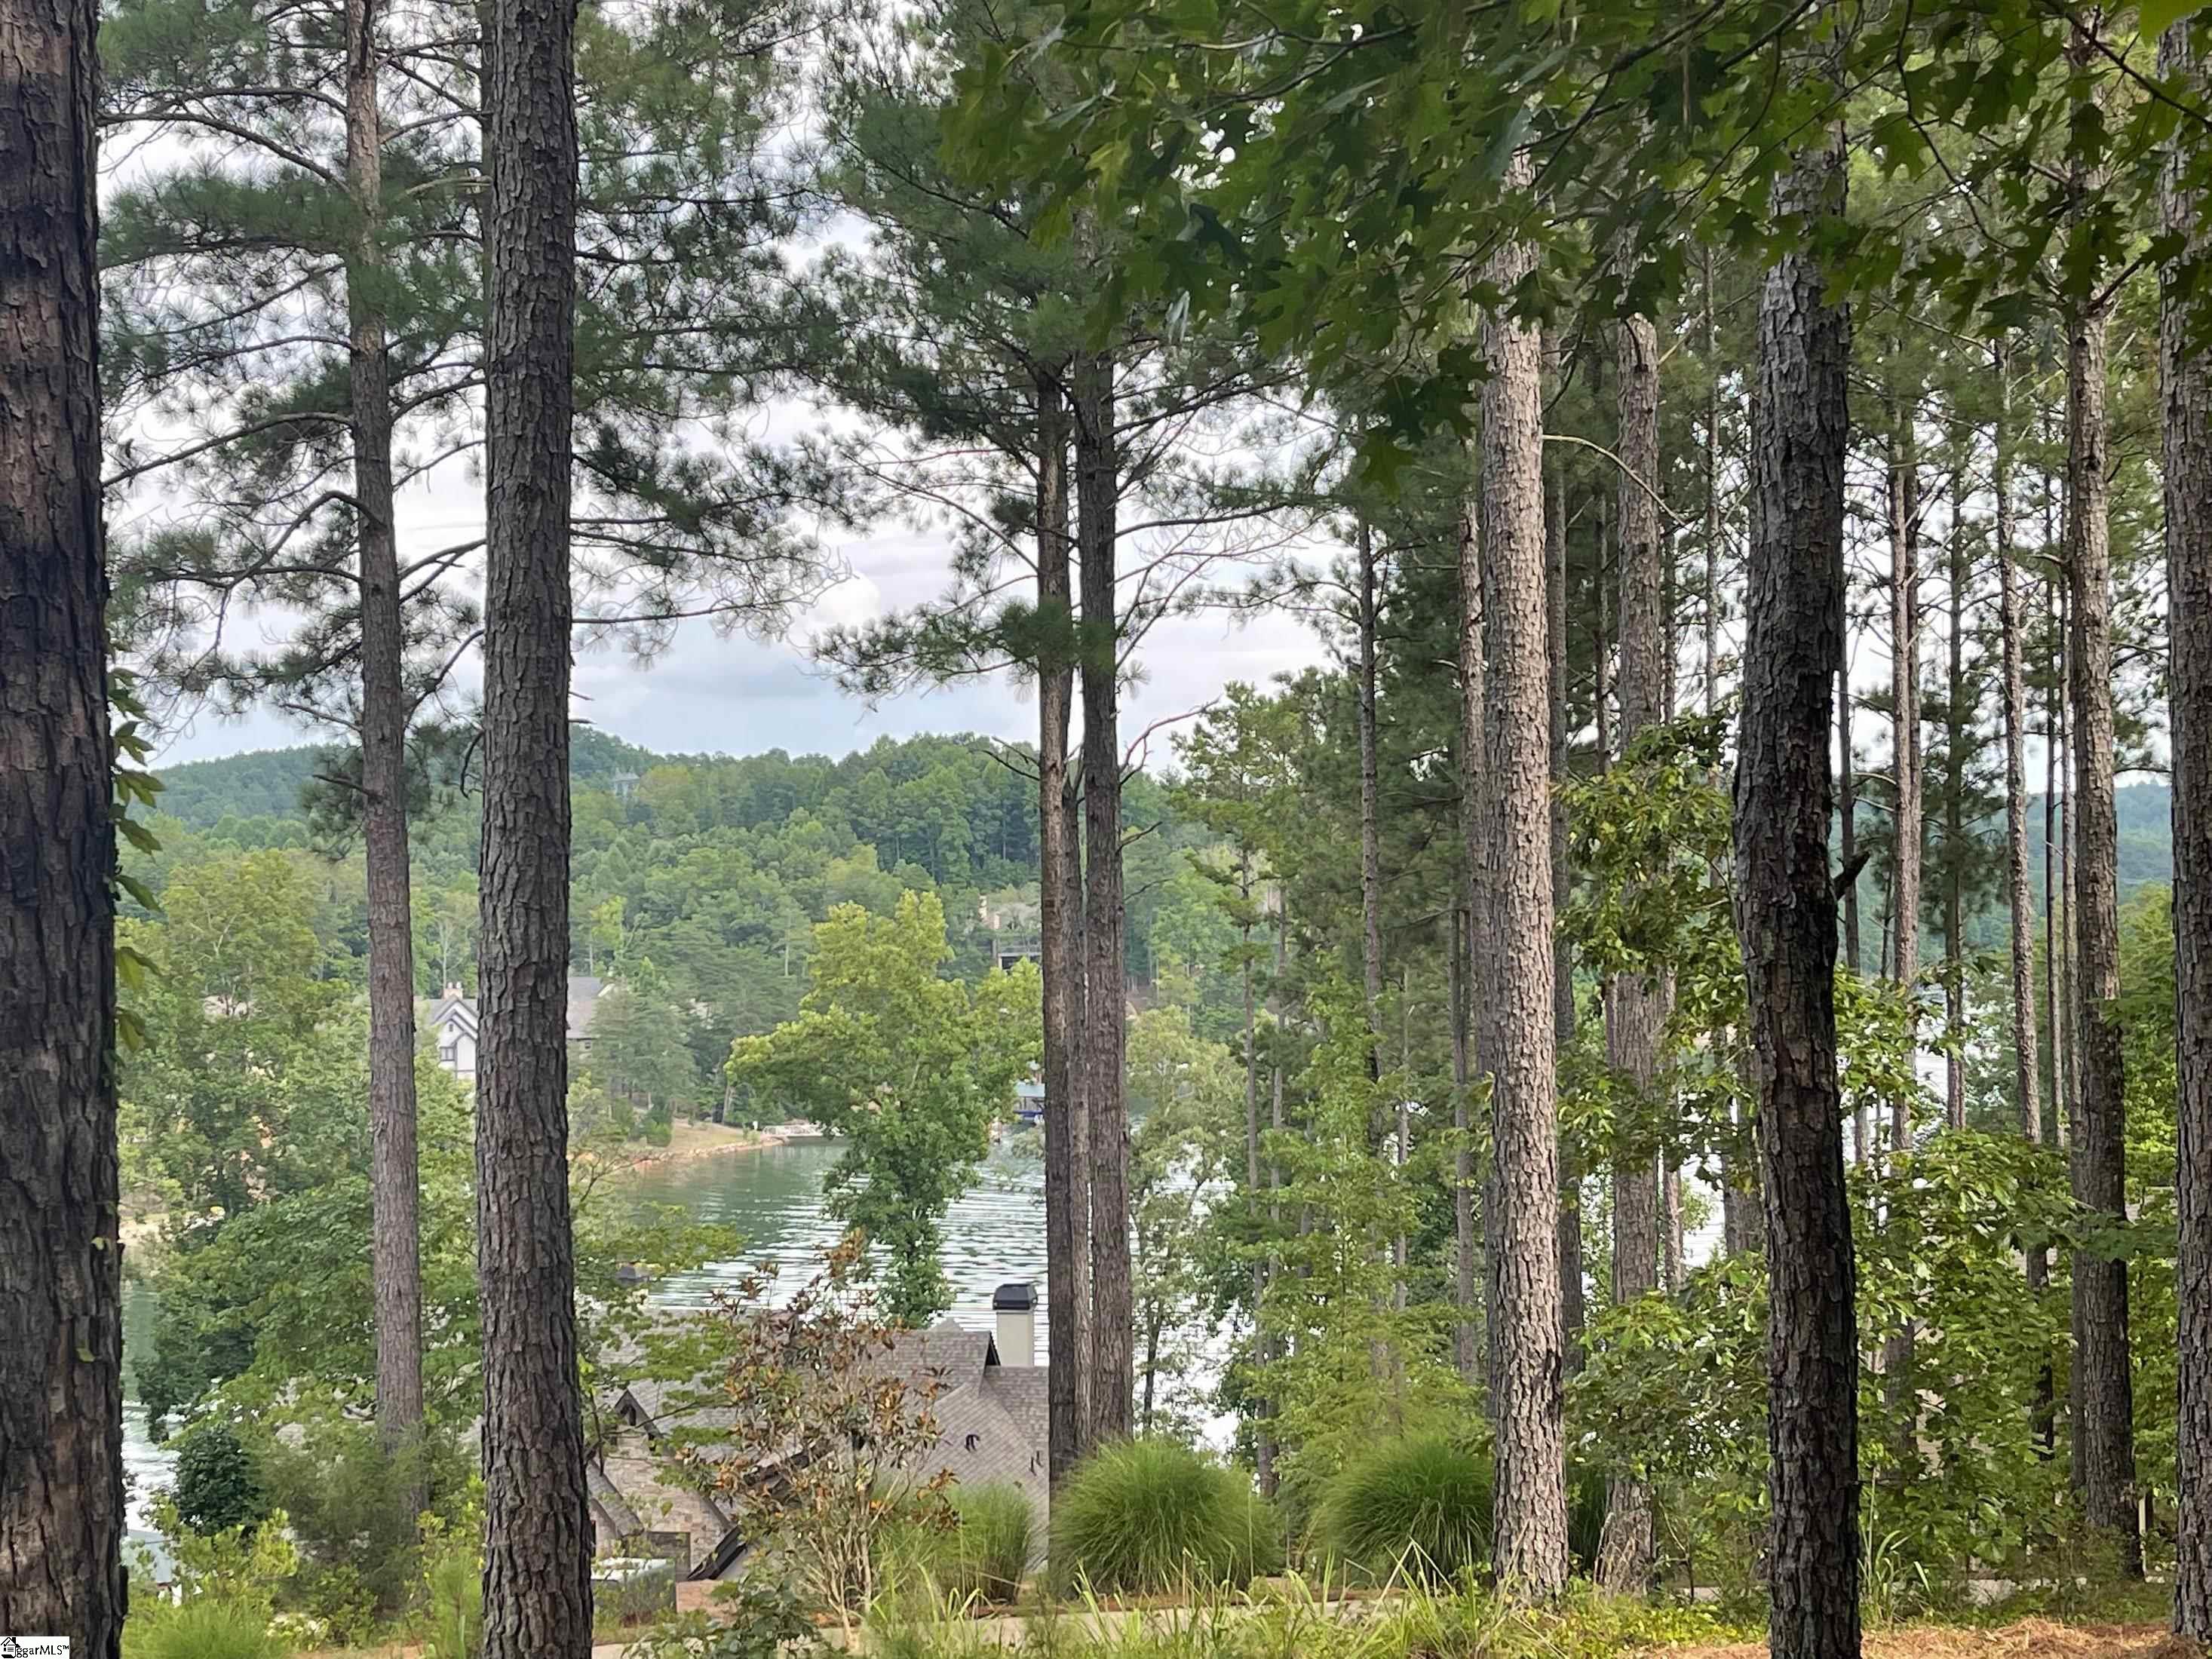 Lake View! This is a beautiful 1.64 acre property with excellent build sites allowing for freedom of home and landscape design that will afford lake views out the back  of the home. Located conveniently near the Cliffs at Keowee Springs South gate, golf pro shop and training facility, and future clubhouse (being built now) make this a great site for your primary or vacation home. The Cliffs at Keowee Springs provides world class golf (home course is a stunning Fazio), dining, and their own Beach Club overlooking Lake Keowee. You'll find The Cliffs and Keowee Springs to be family friendly and convenient to Seneca, Clemson and Greenville. The list of amenities and concierge services offered through the Cliffs is significant and includes: ability to lease a boat slip in Keowee Springs private marina,fitness facilities, tennis/pickle ball and so much more. Membership options available with purchase of property.